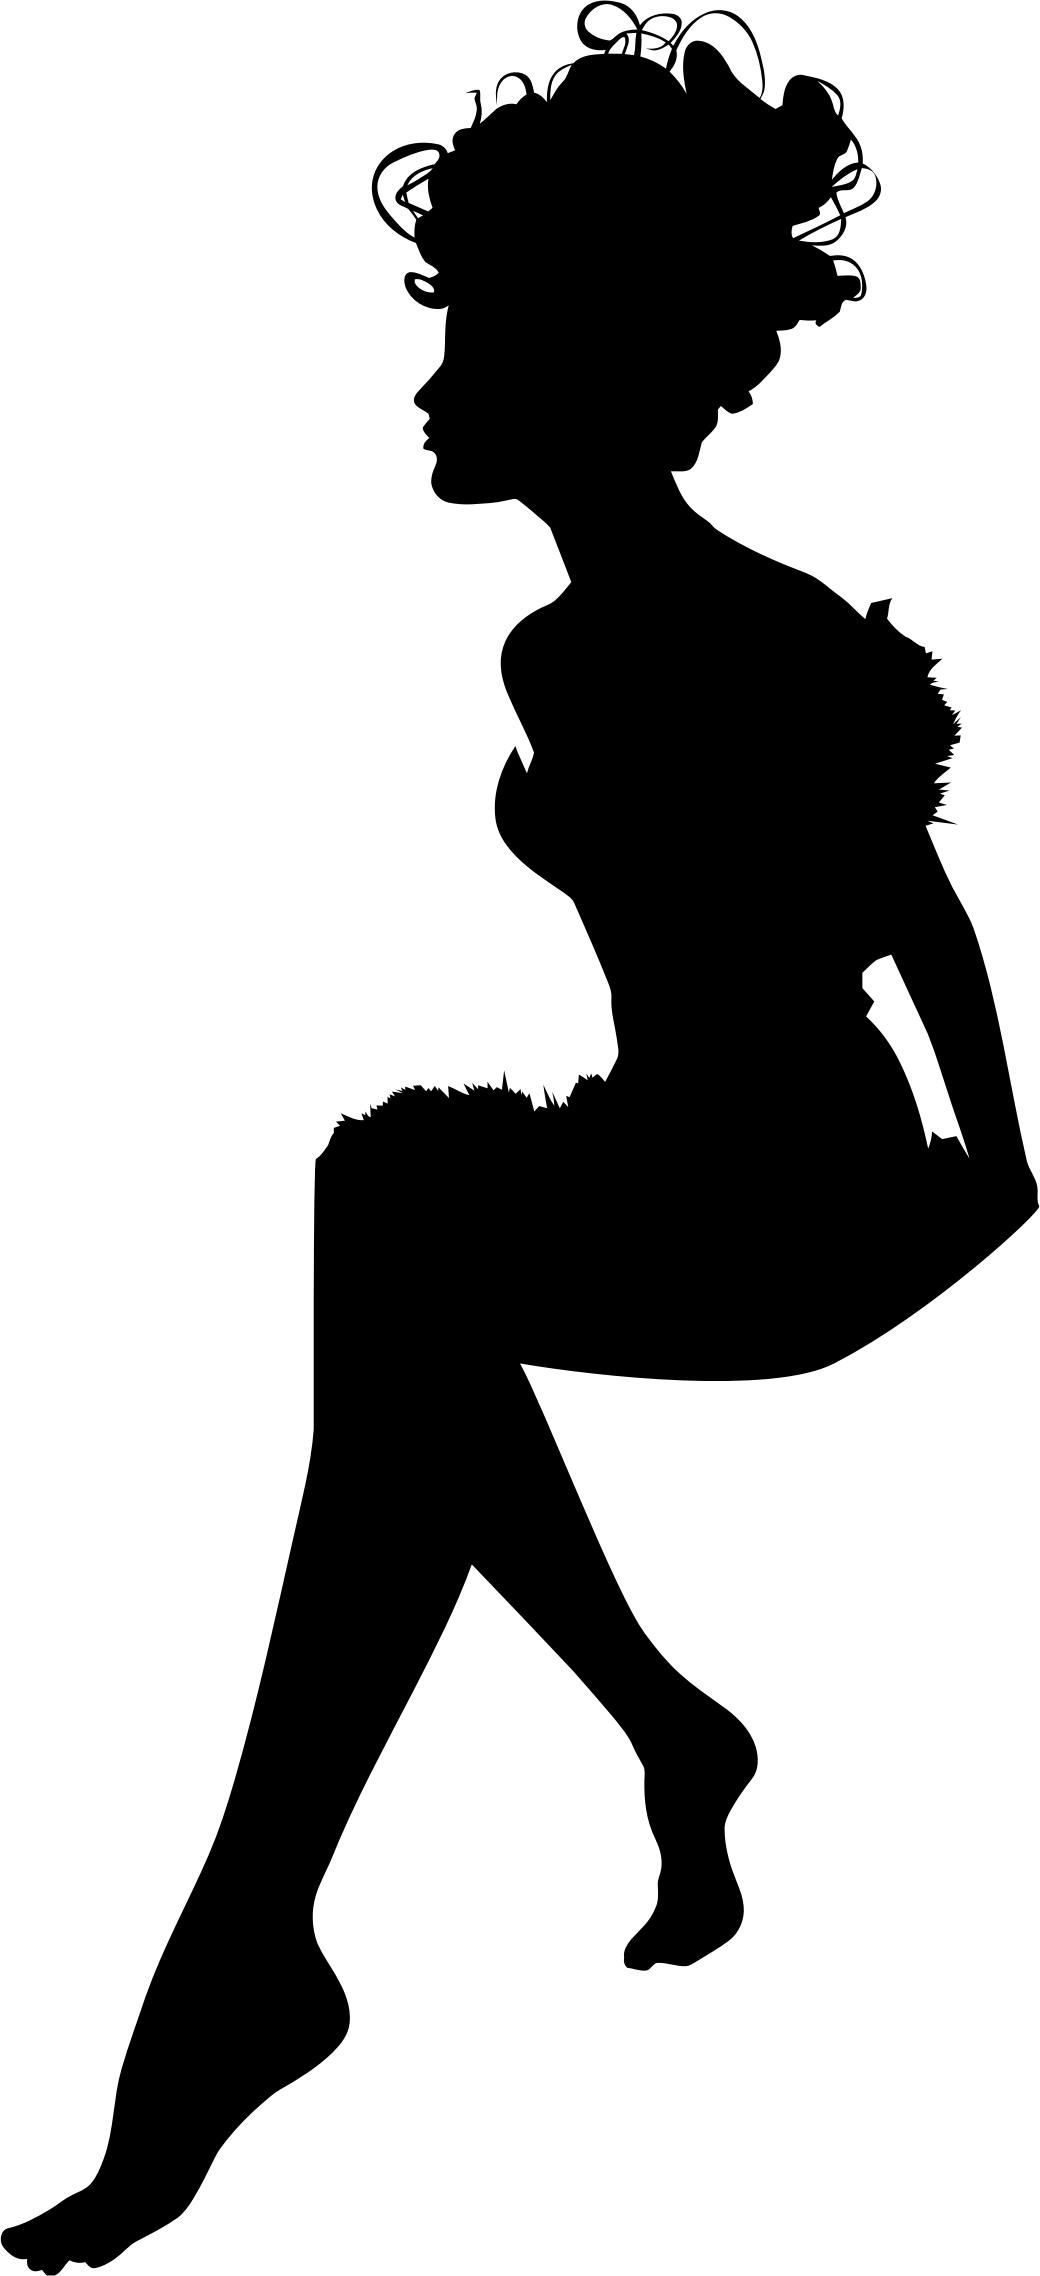 Fairy Sitting In CIrcle Minus Circle Silhouette png